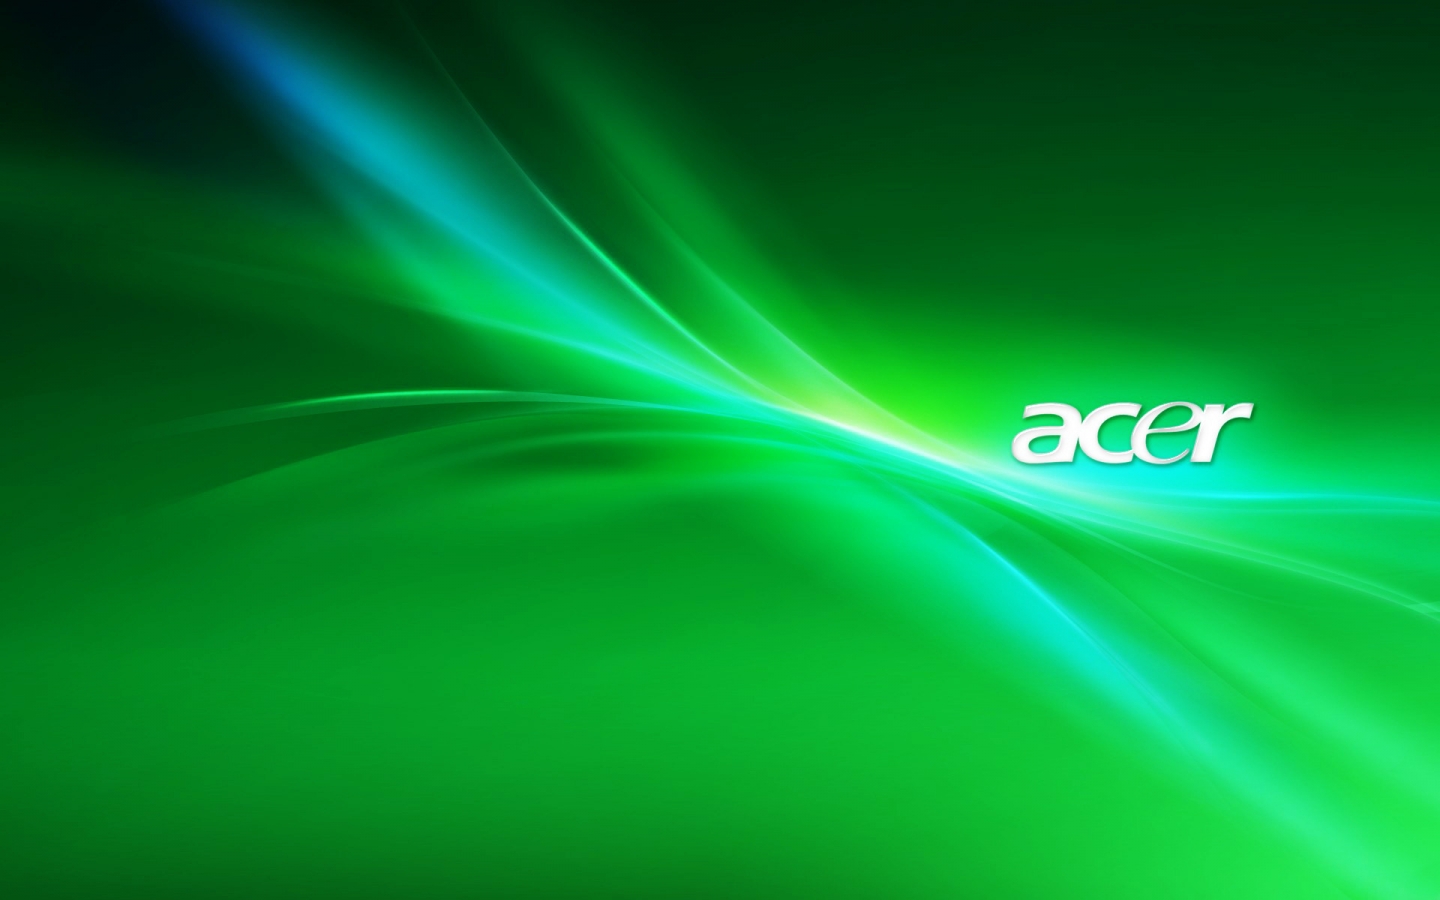 Acer Green for 1440 x 900 widescreen resolution